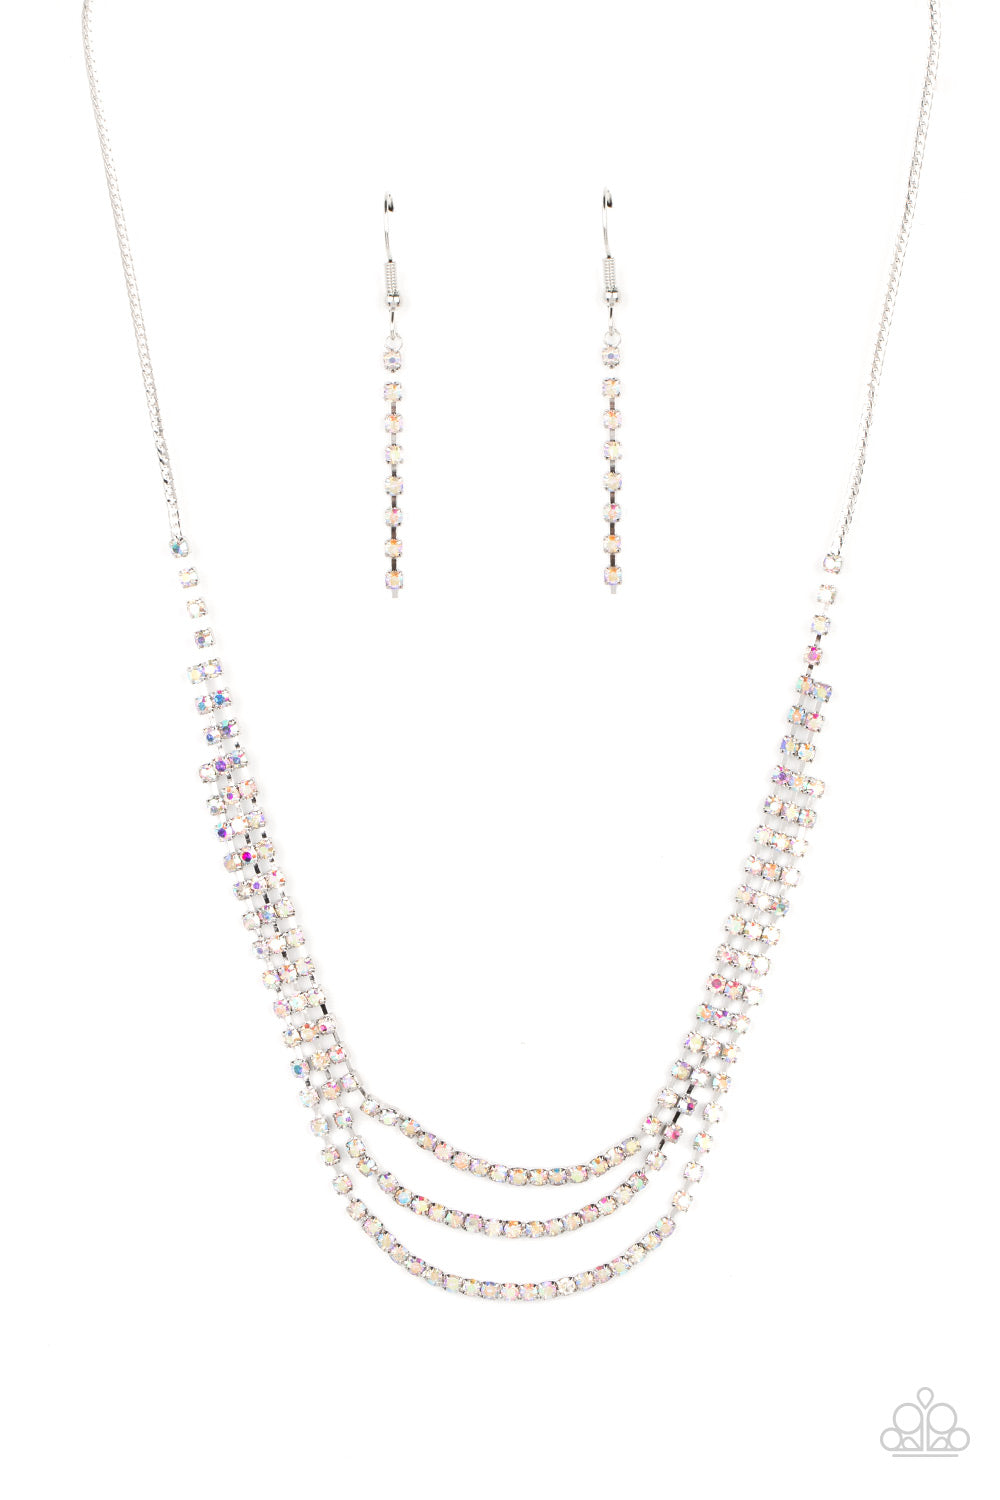 Paparazzi Accessories Surreal Sparkle - Multi Featuring square fittings staggered rows of iridescent rhinestones cascade from a dainty silver snake chain below the collar. The interconnected rows delicately give way to freefalling layers, adding glitzy mo